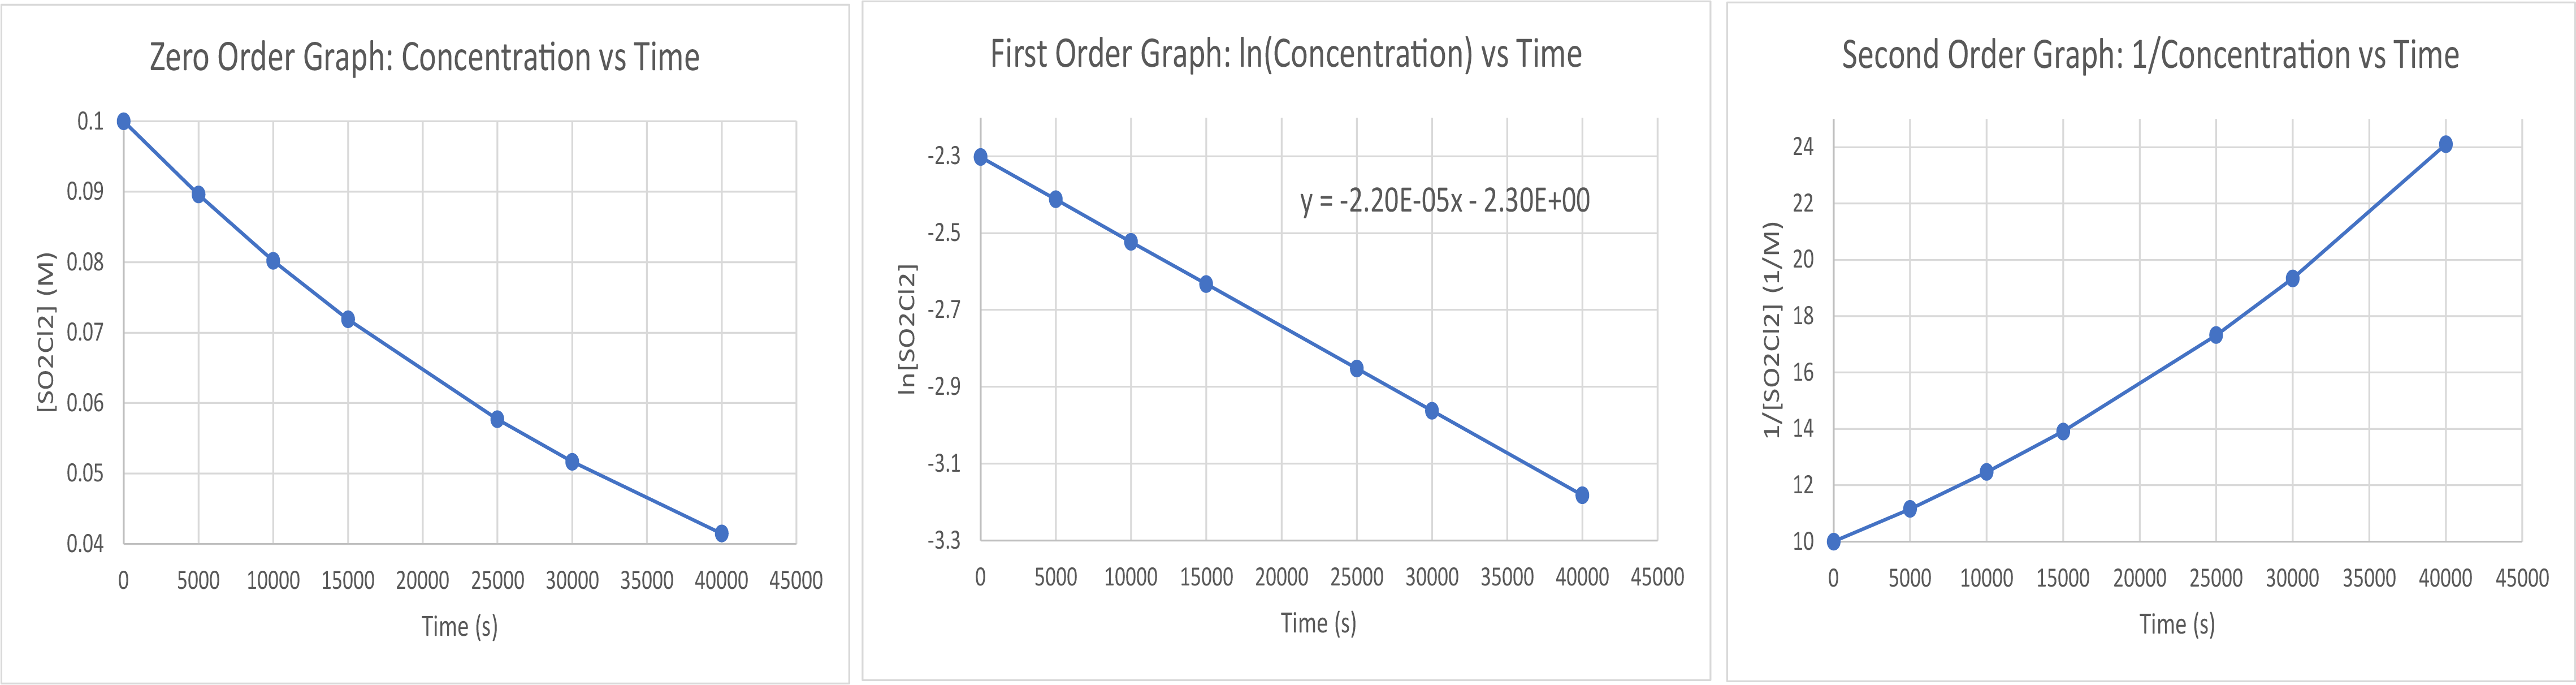 A graph, with the title “1 divided by [ A ] vs. Time” is shown, with the label, “Time ( s ),” on the x-axis. The label “1 divided by [ A ]” appears left of the y-axis. The x-axis shows markings beginning at zero and continuing at intervals of 10 up to and including 40. The y-axis on the left shows markings beginning at 0 and increasing by intervals of 1 up to and including 5. A line with an increasing trend is drawn through six points at approximately (4, 1), (10, 1.5), (15, 2.2), (20, 2.8), (26, 3.4), and (36, 4.4).